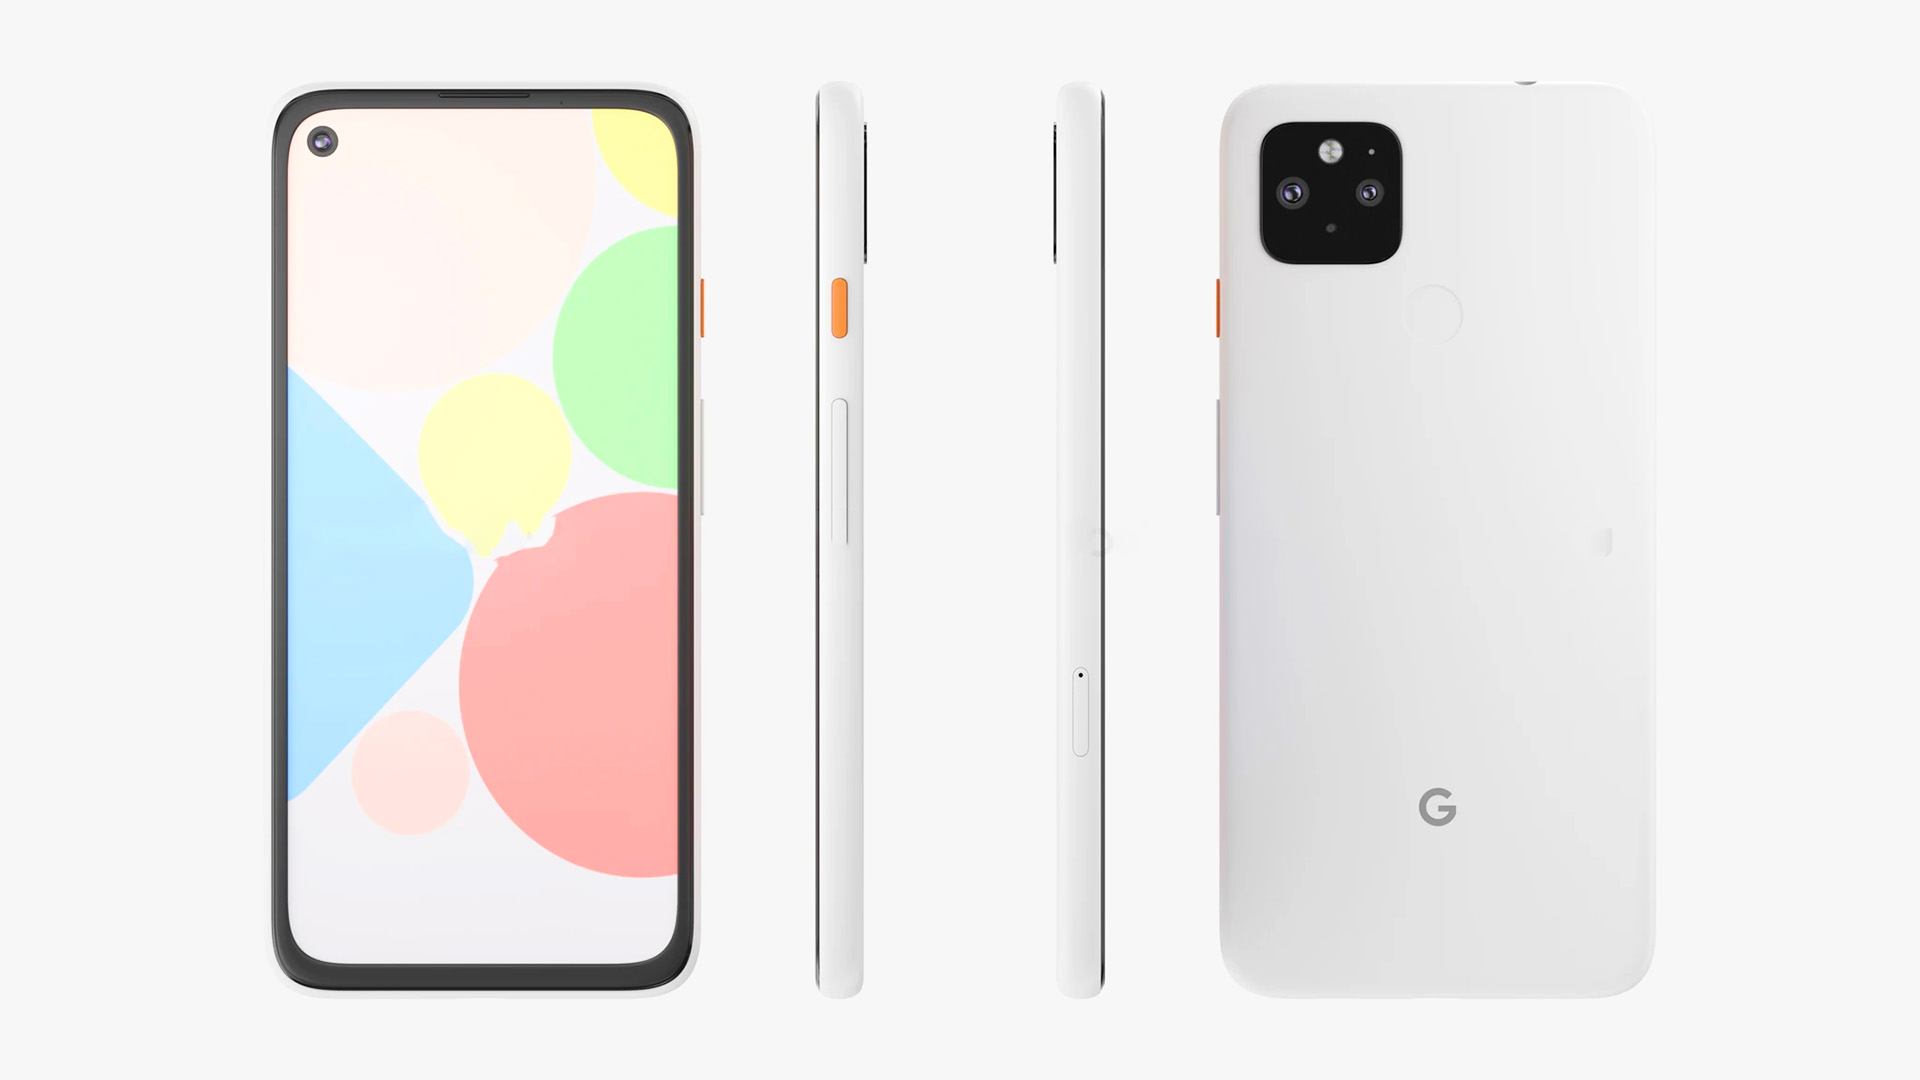 The back cover of Google Pixel 4a XL shows dual camera